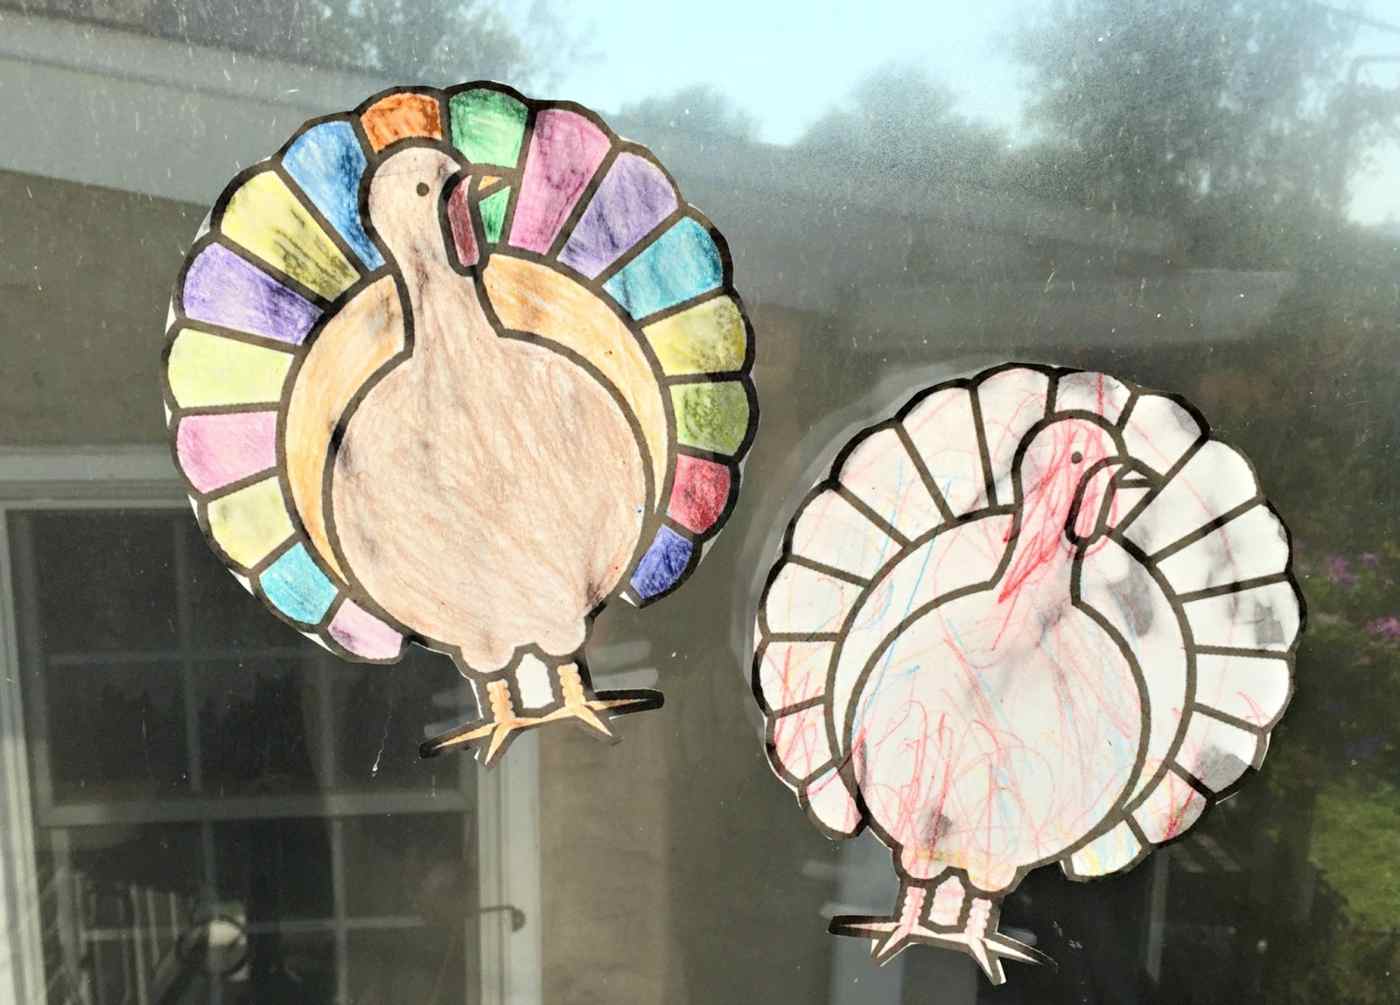 Craft ideas for autumn for window pictures in the form of turkeys and ideas for other designs